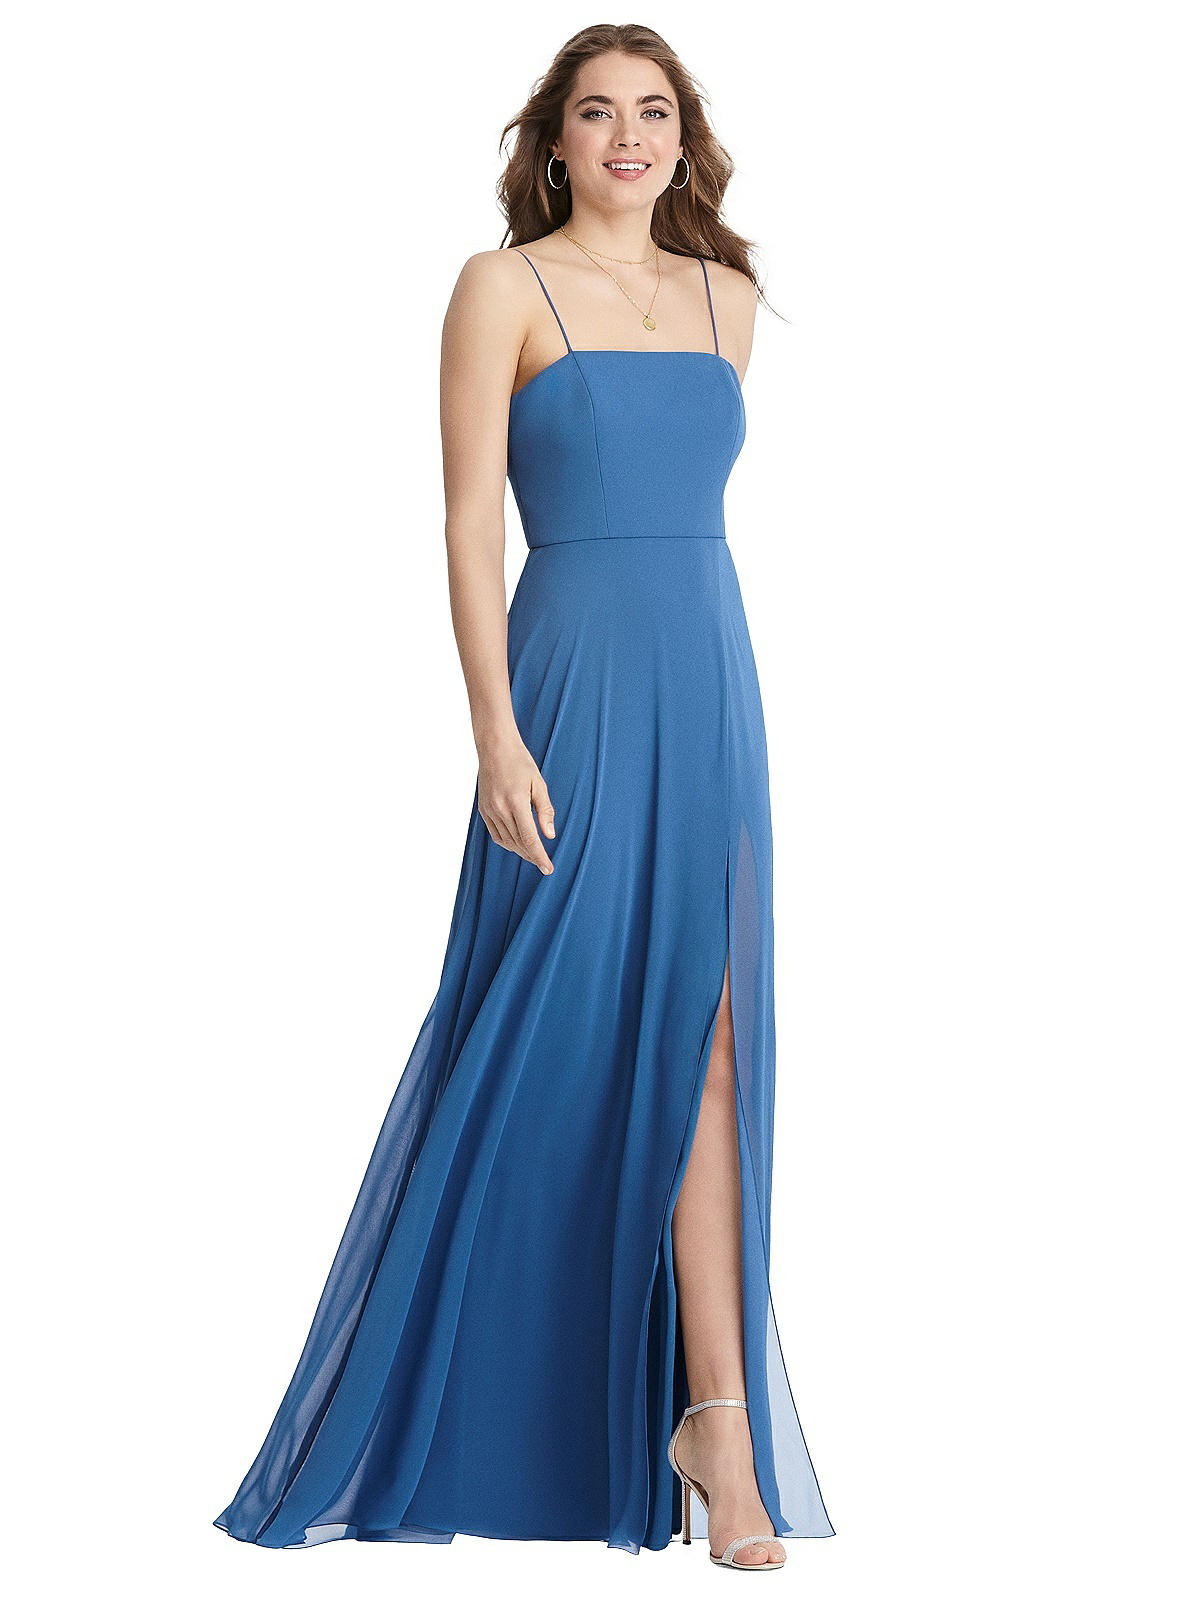 Special Order Square Neck Chiffon Maxi Dress with Front Slit - Elliott